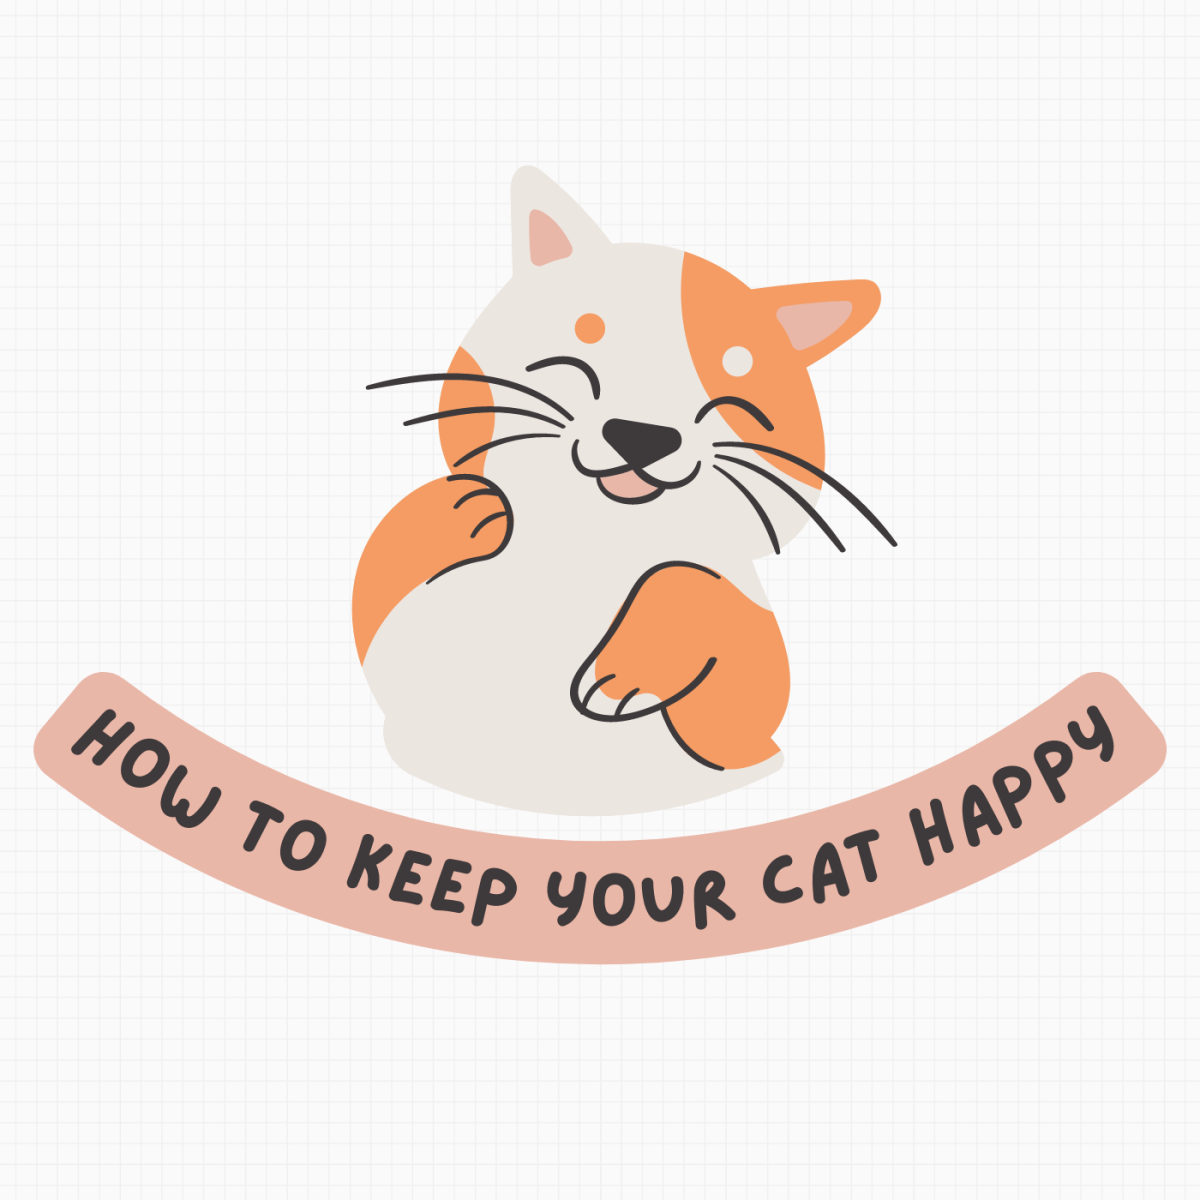 Seven Tips to Keeping Your Cat Happy